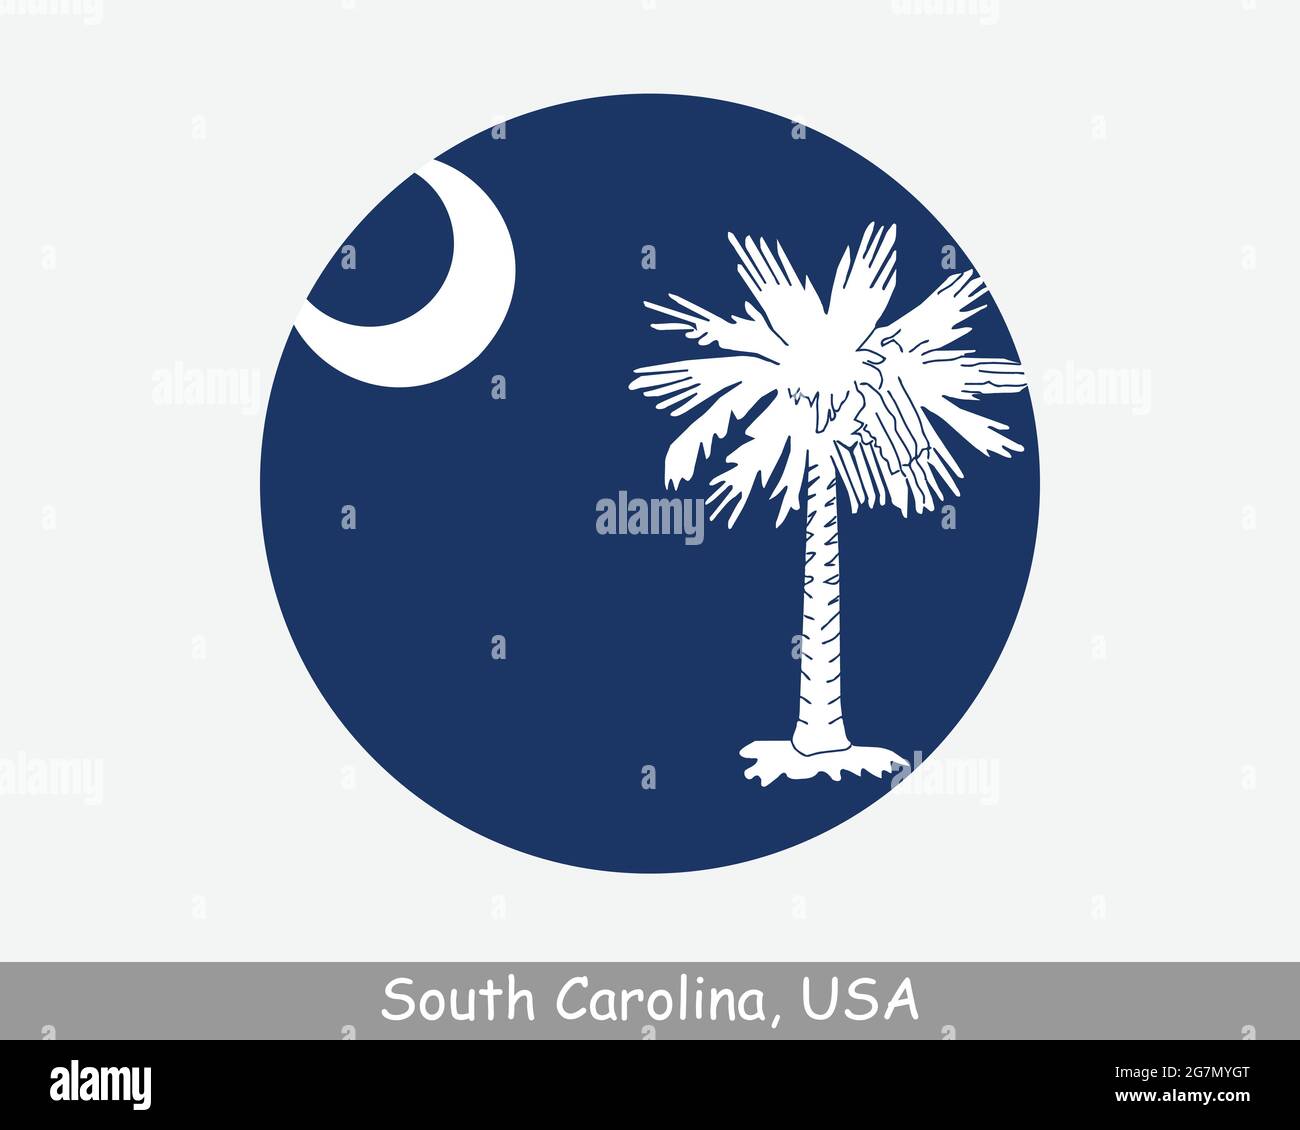 South Carolina Round Circle Flag. SC USA State Circular Button Banner Icon. South Carolina United States of America State Flag. The Palmetto State EPS Stock Vector